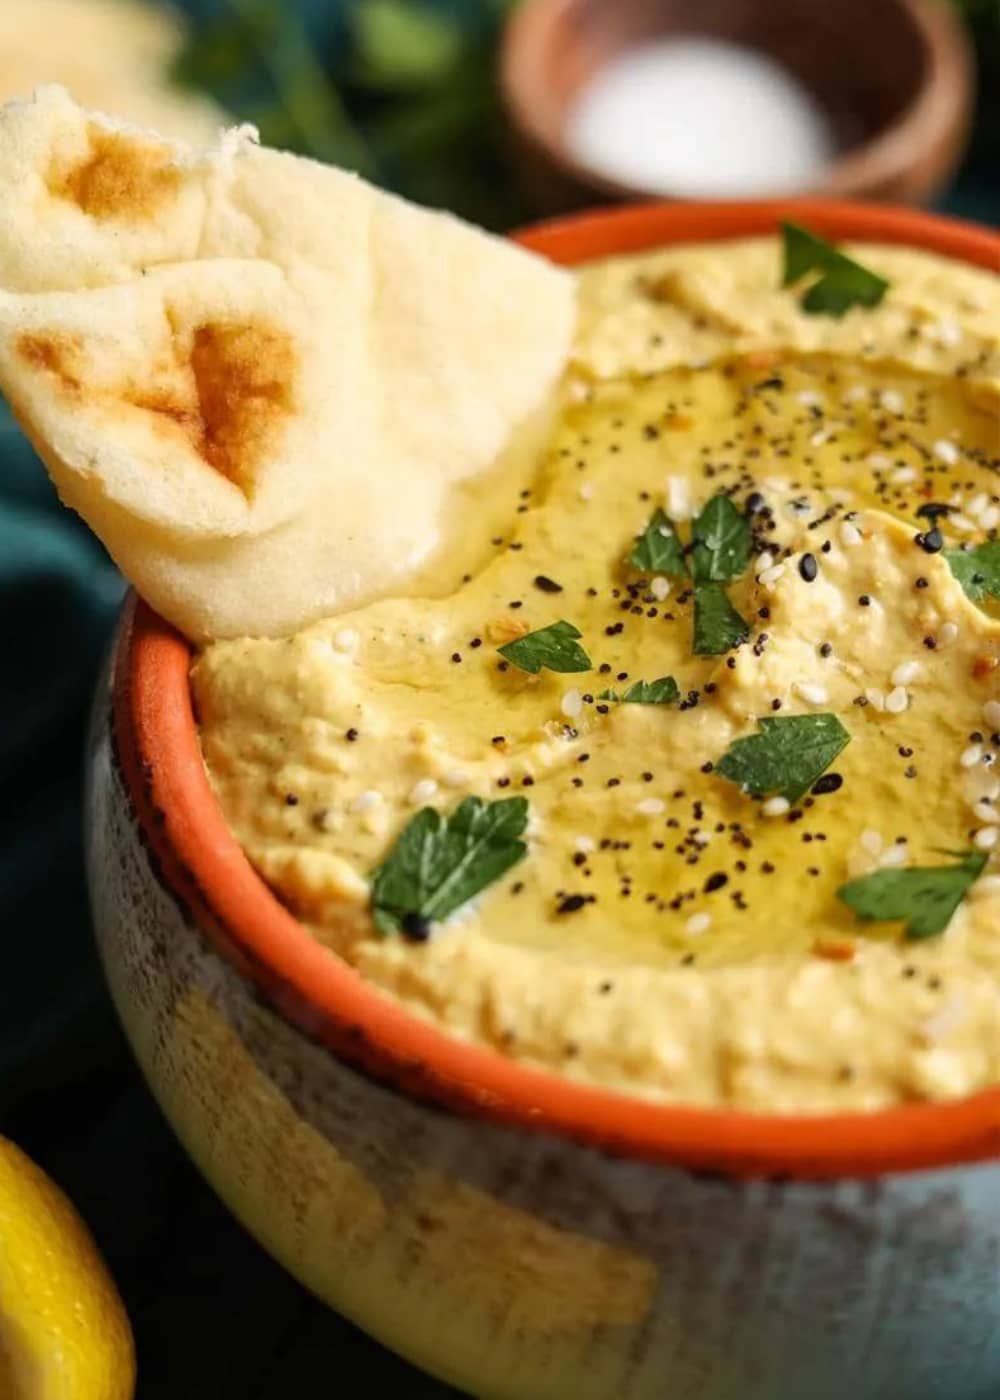 Vadouvan (French-style Curry) Hummus recipe